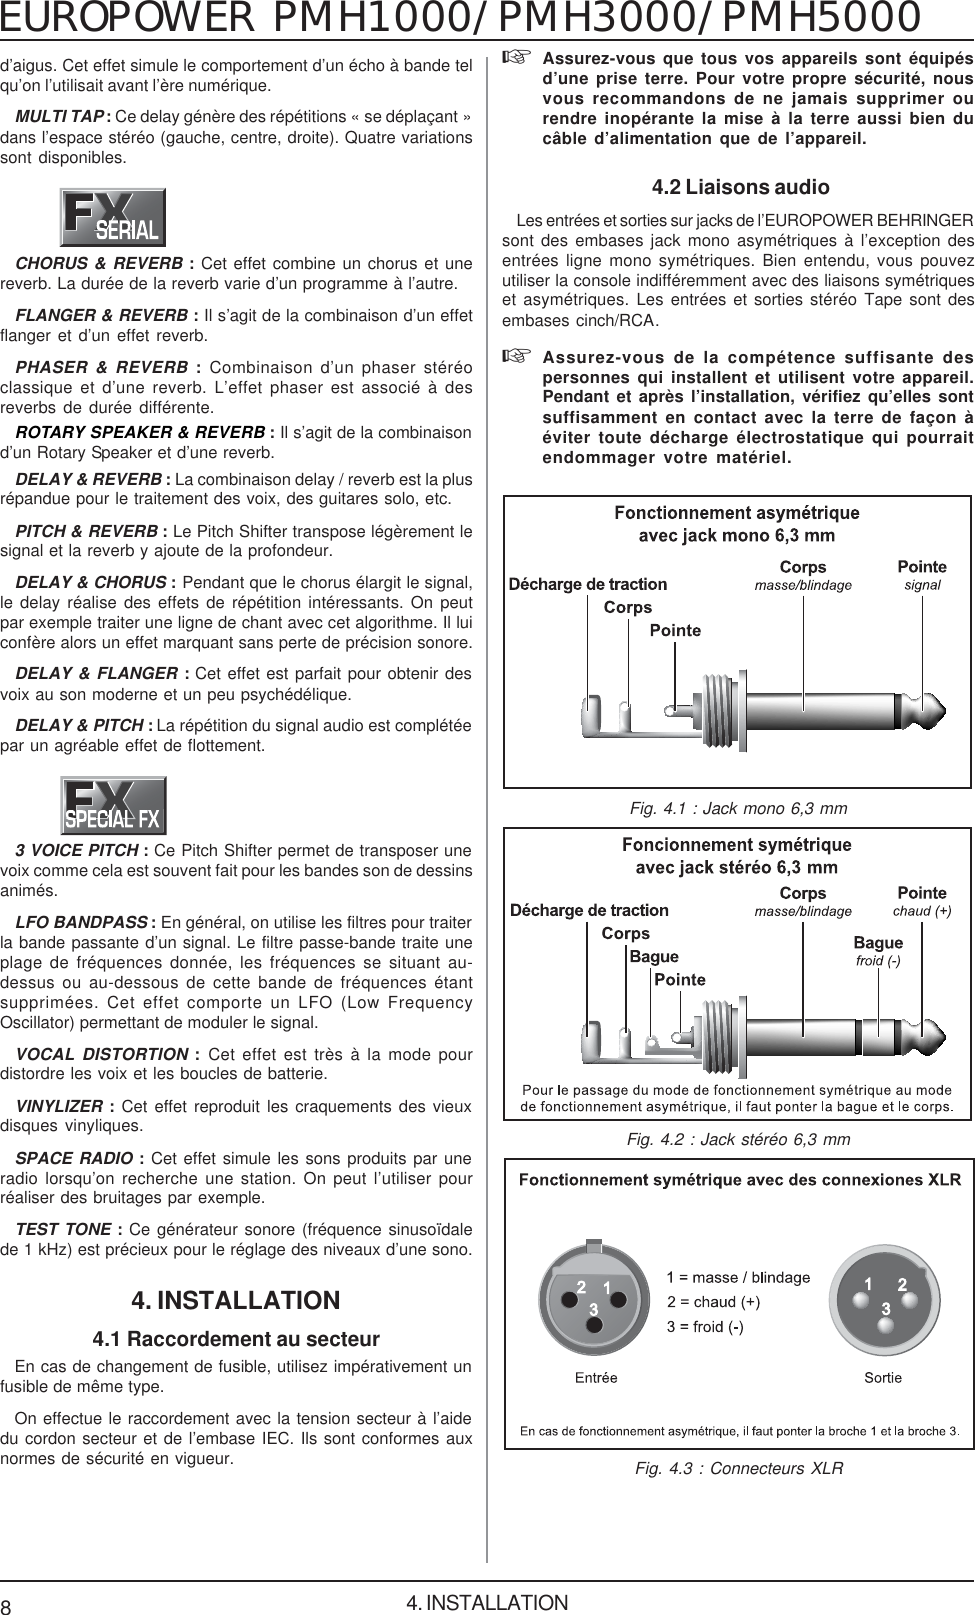 Page 8 of 12 - Behringer PMH1000 User Manual (French) P0115 M FR